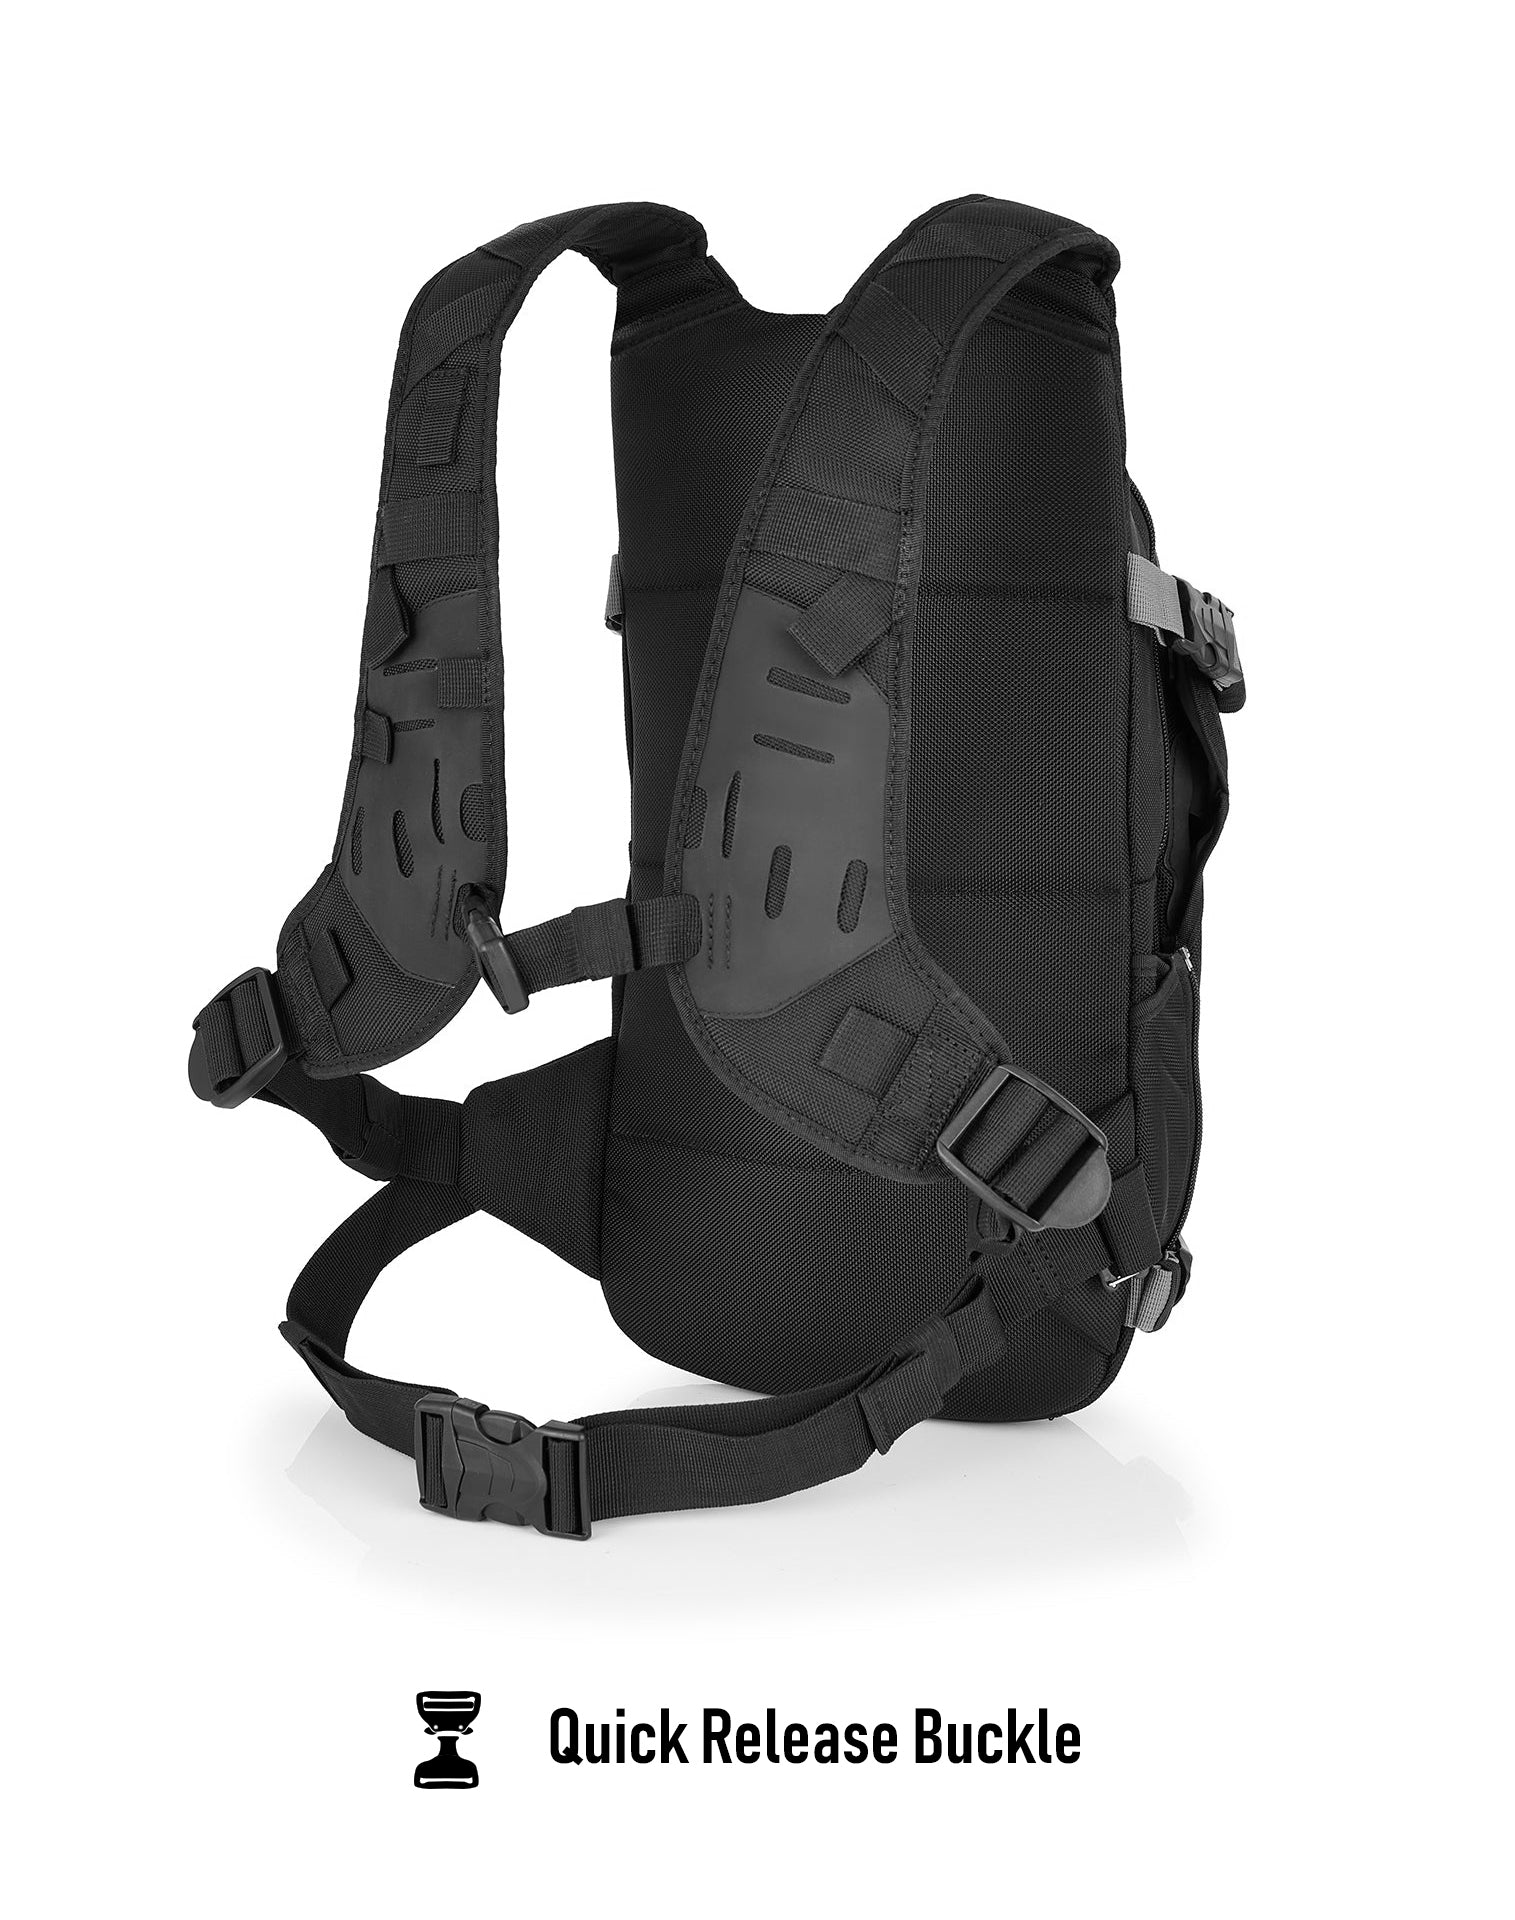 Viking Explorer 12L Yamaha Adventure Touring Backpack Quick Release Buckle